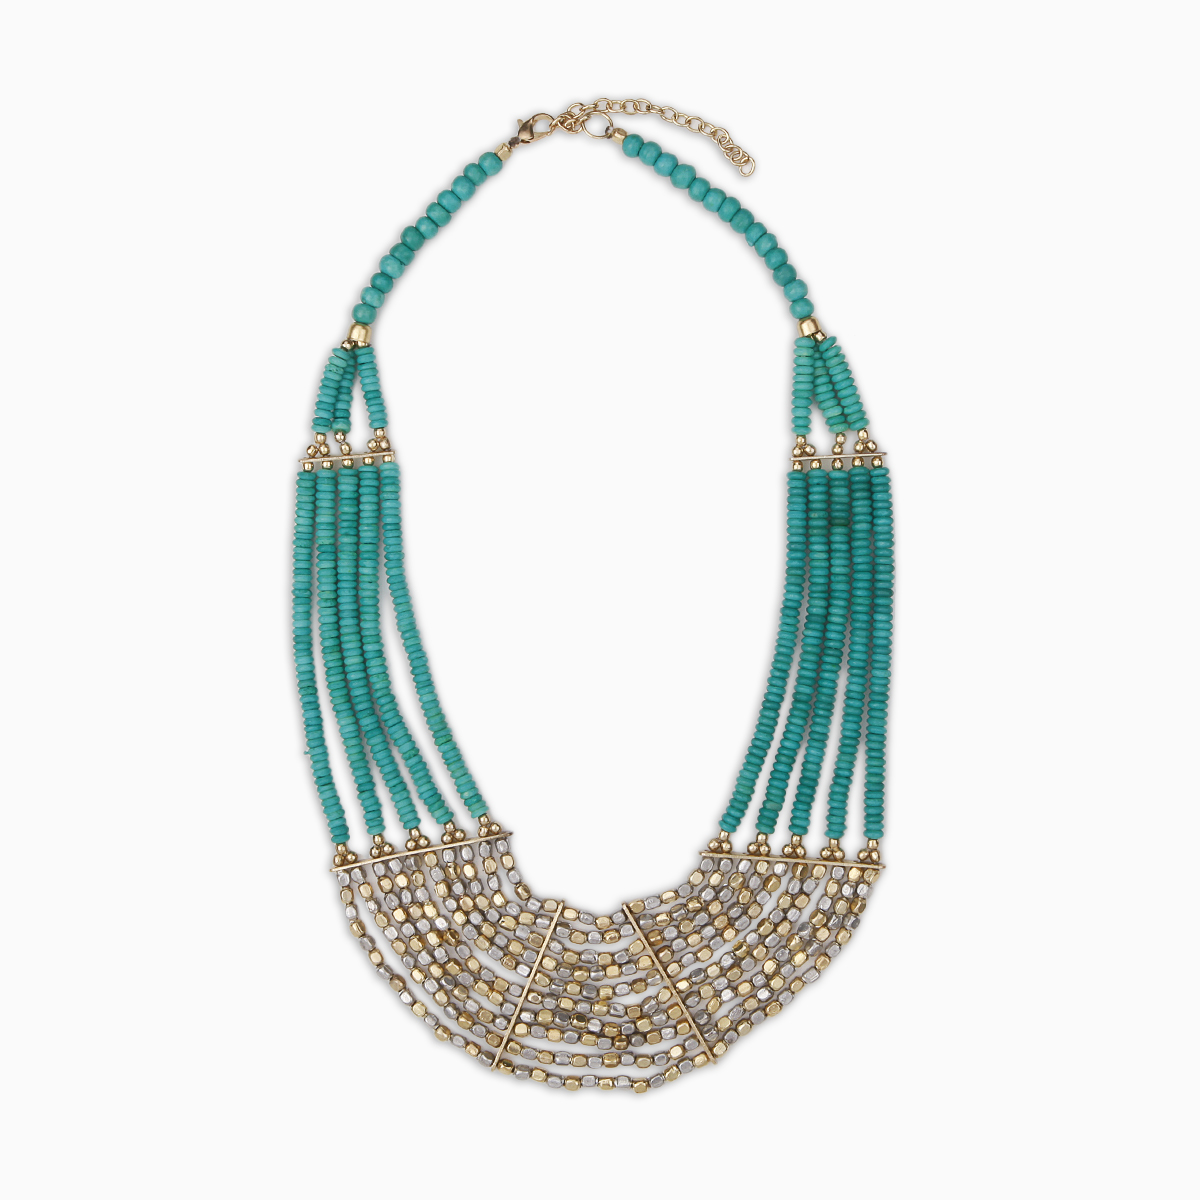 Turquoise Collar Necklace in Turquoise | DAILYLOOK